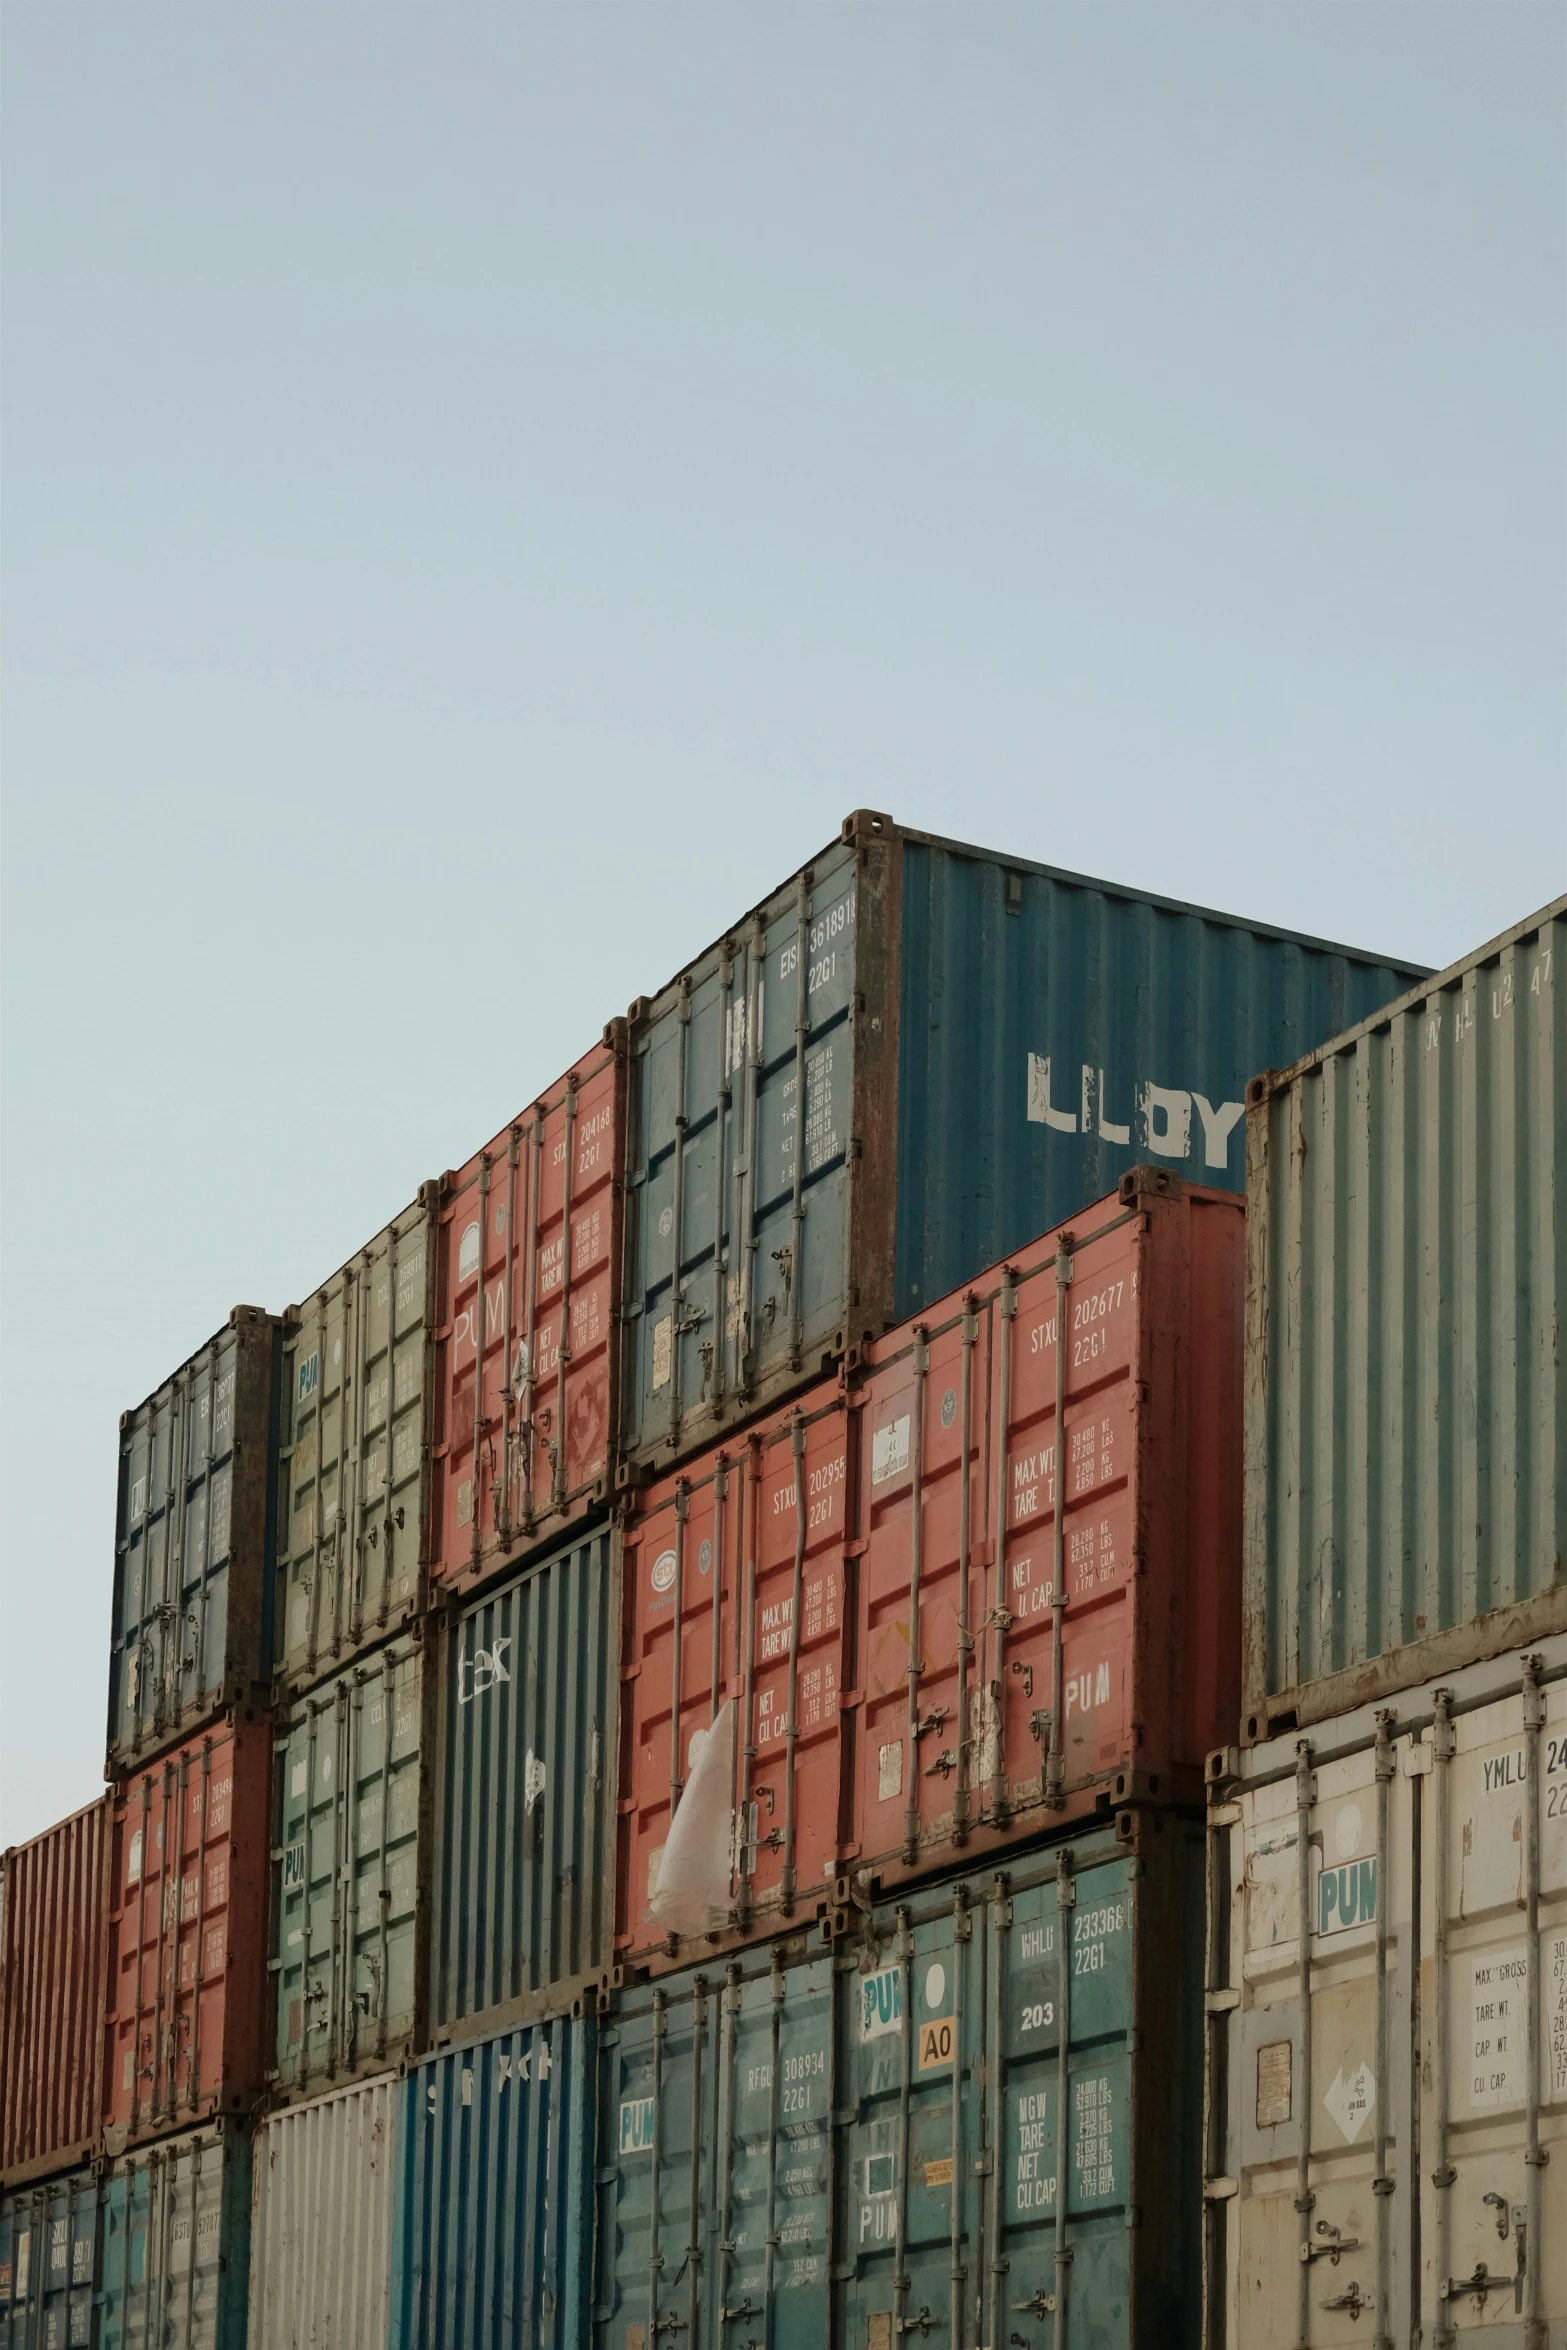 containers stacked side by side with one being open